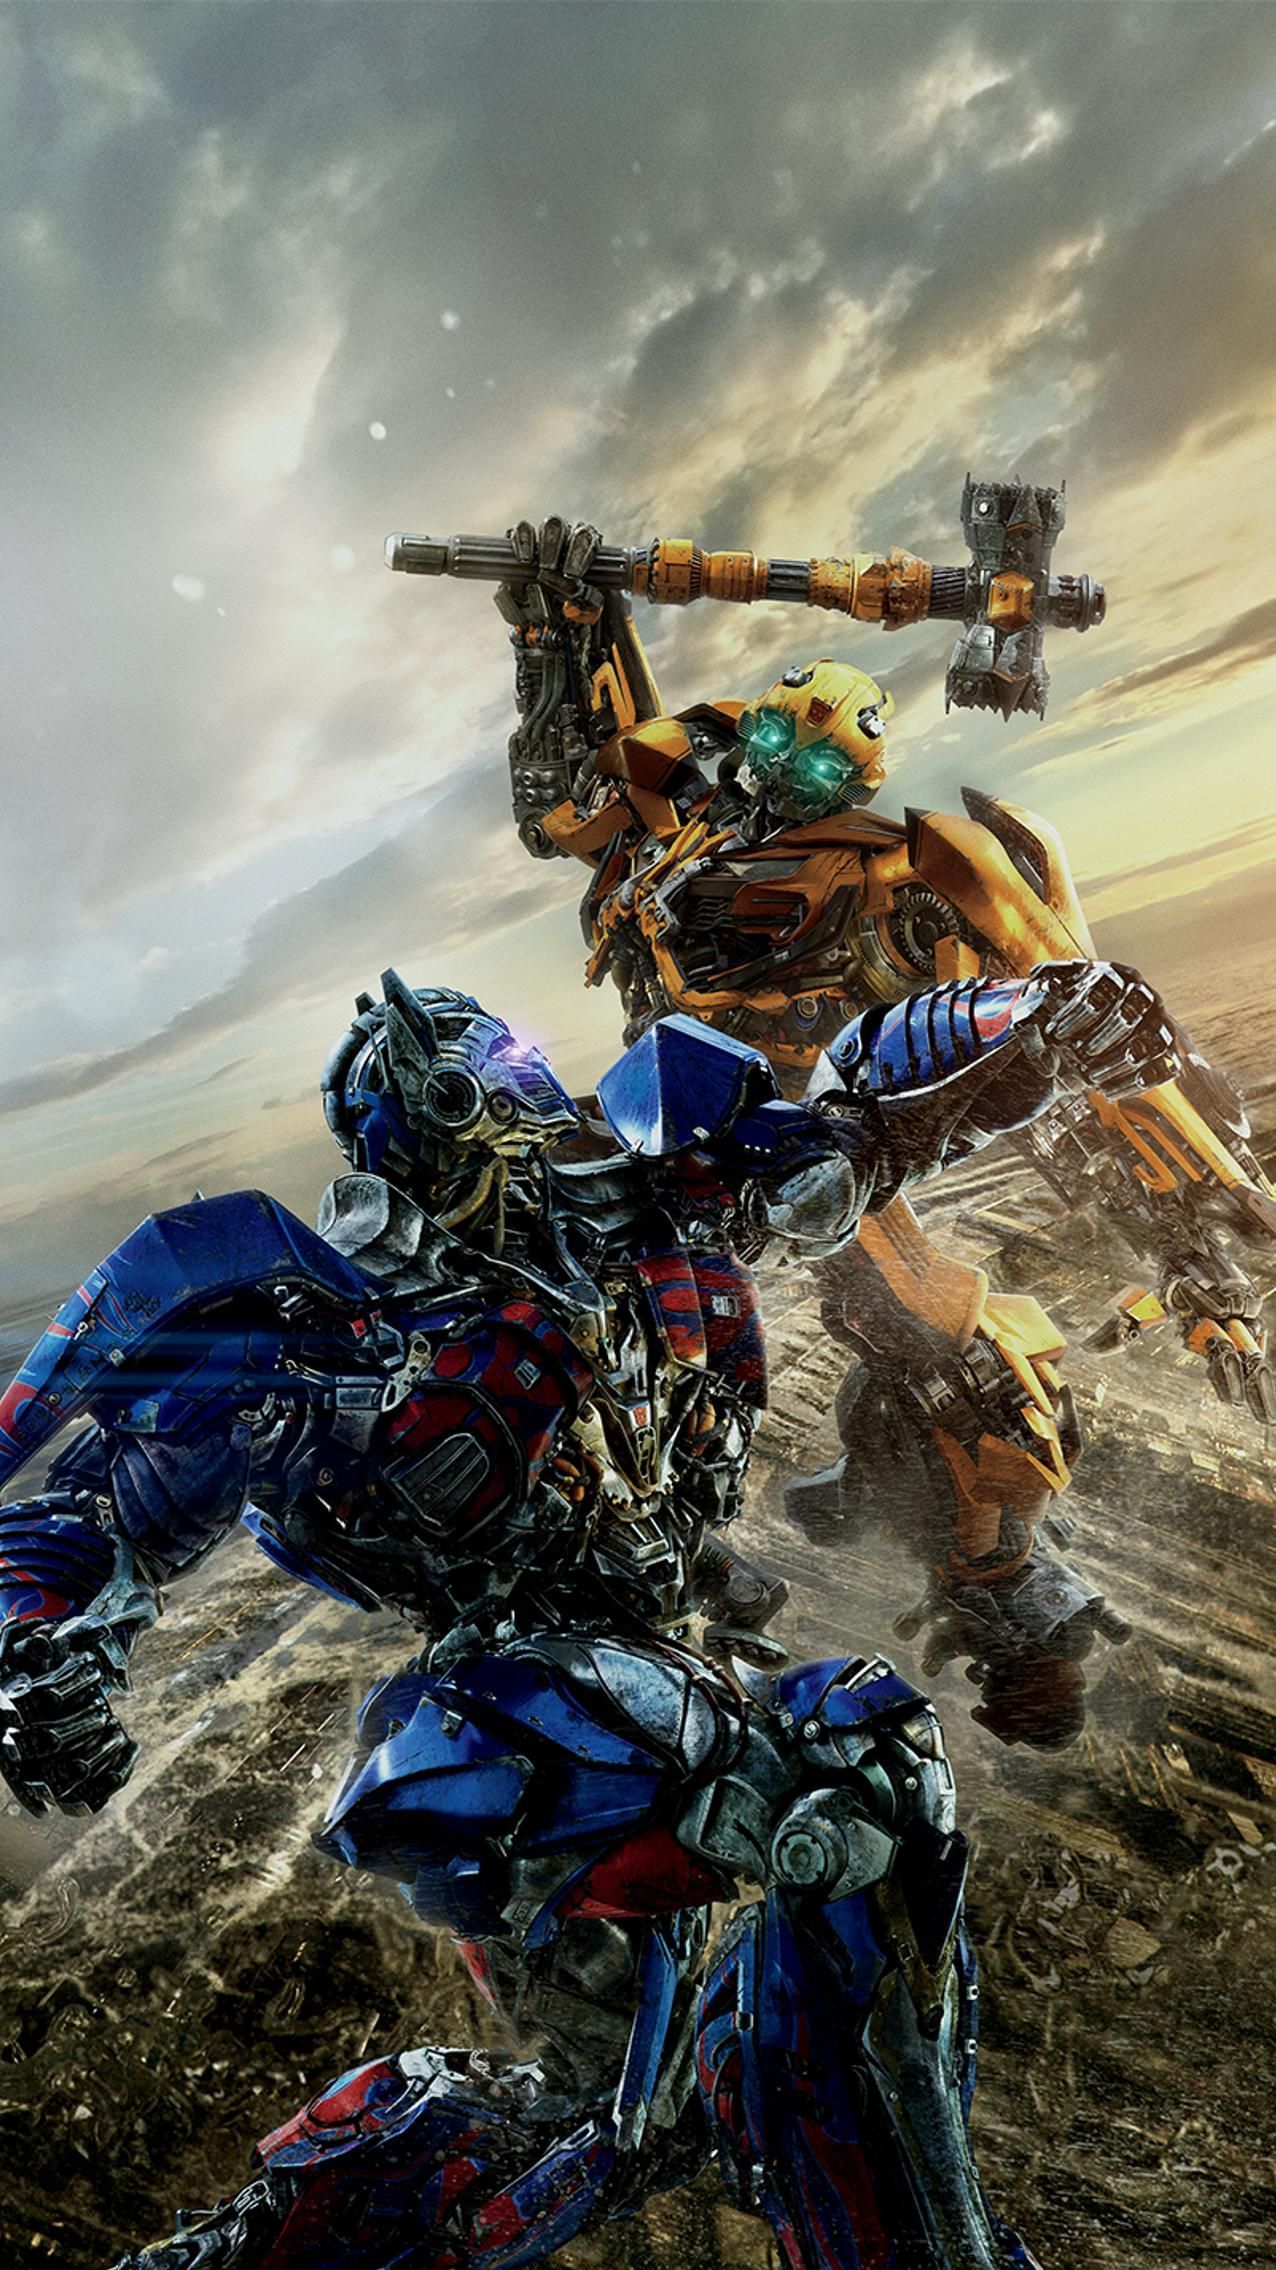 Transformers: Age of Extinction Phone Wallpaper - Mobile Abyss